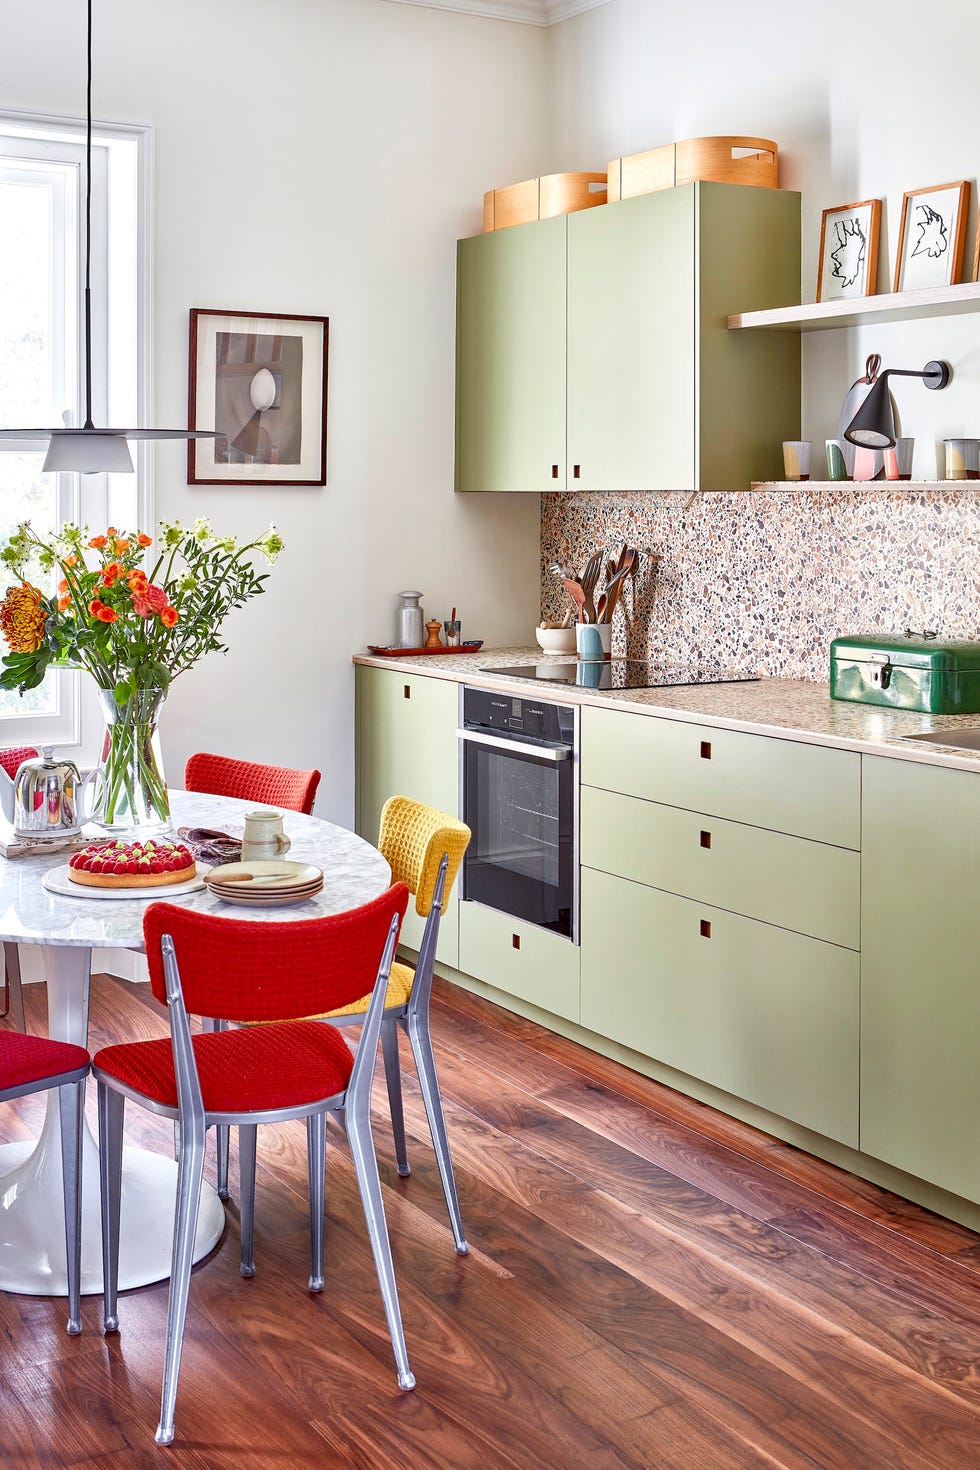 The kitchen of this Victorian flat in South London has been renovated with British-made Foreso worktops and sage green cabinets.